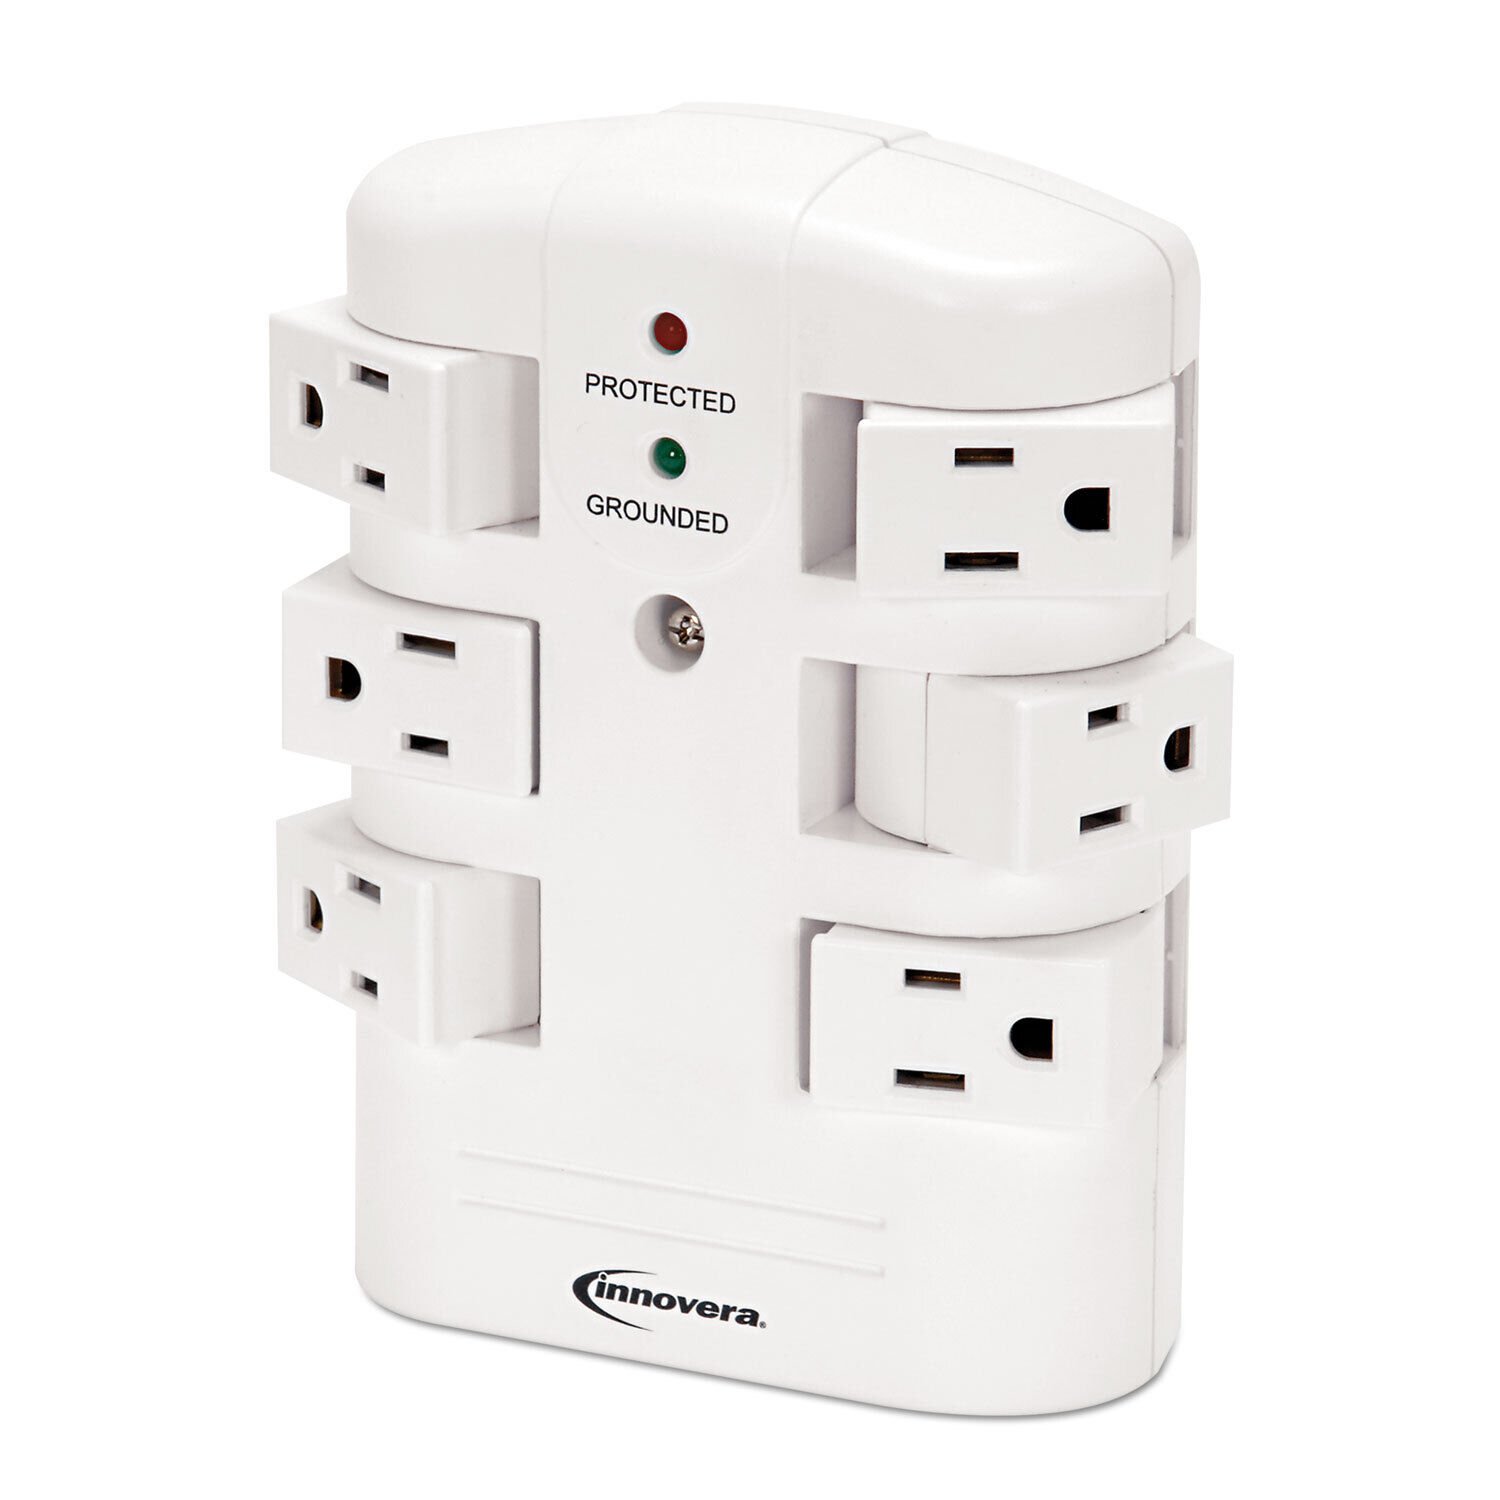 Innovera Wall Mount Surge Protector 6 AC Outlets 2160 J White IVR71651